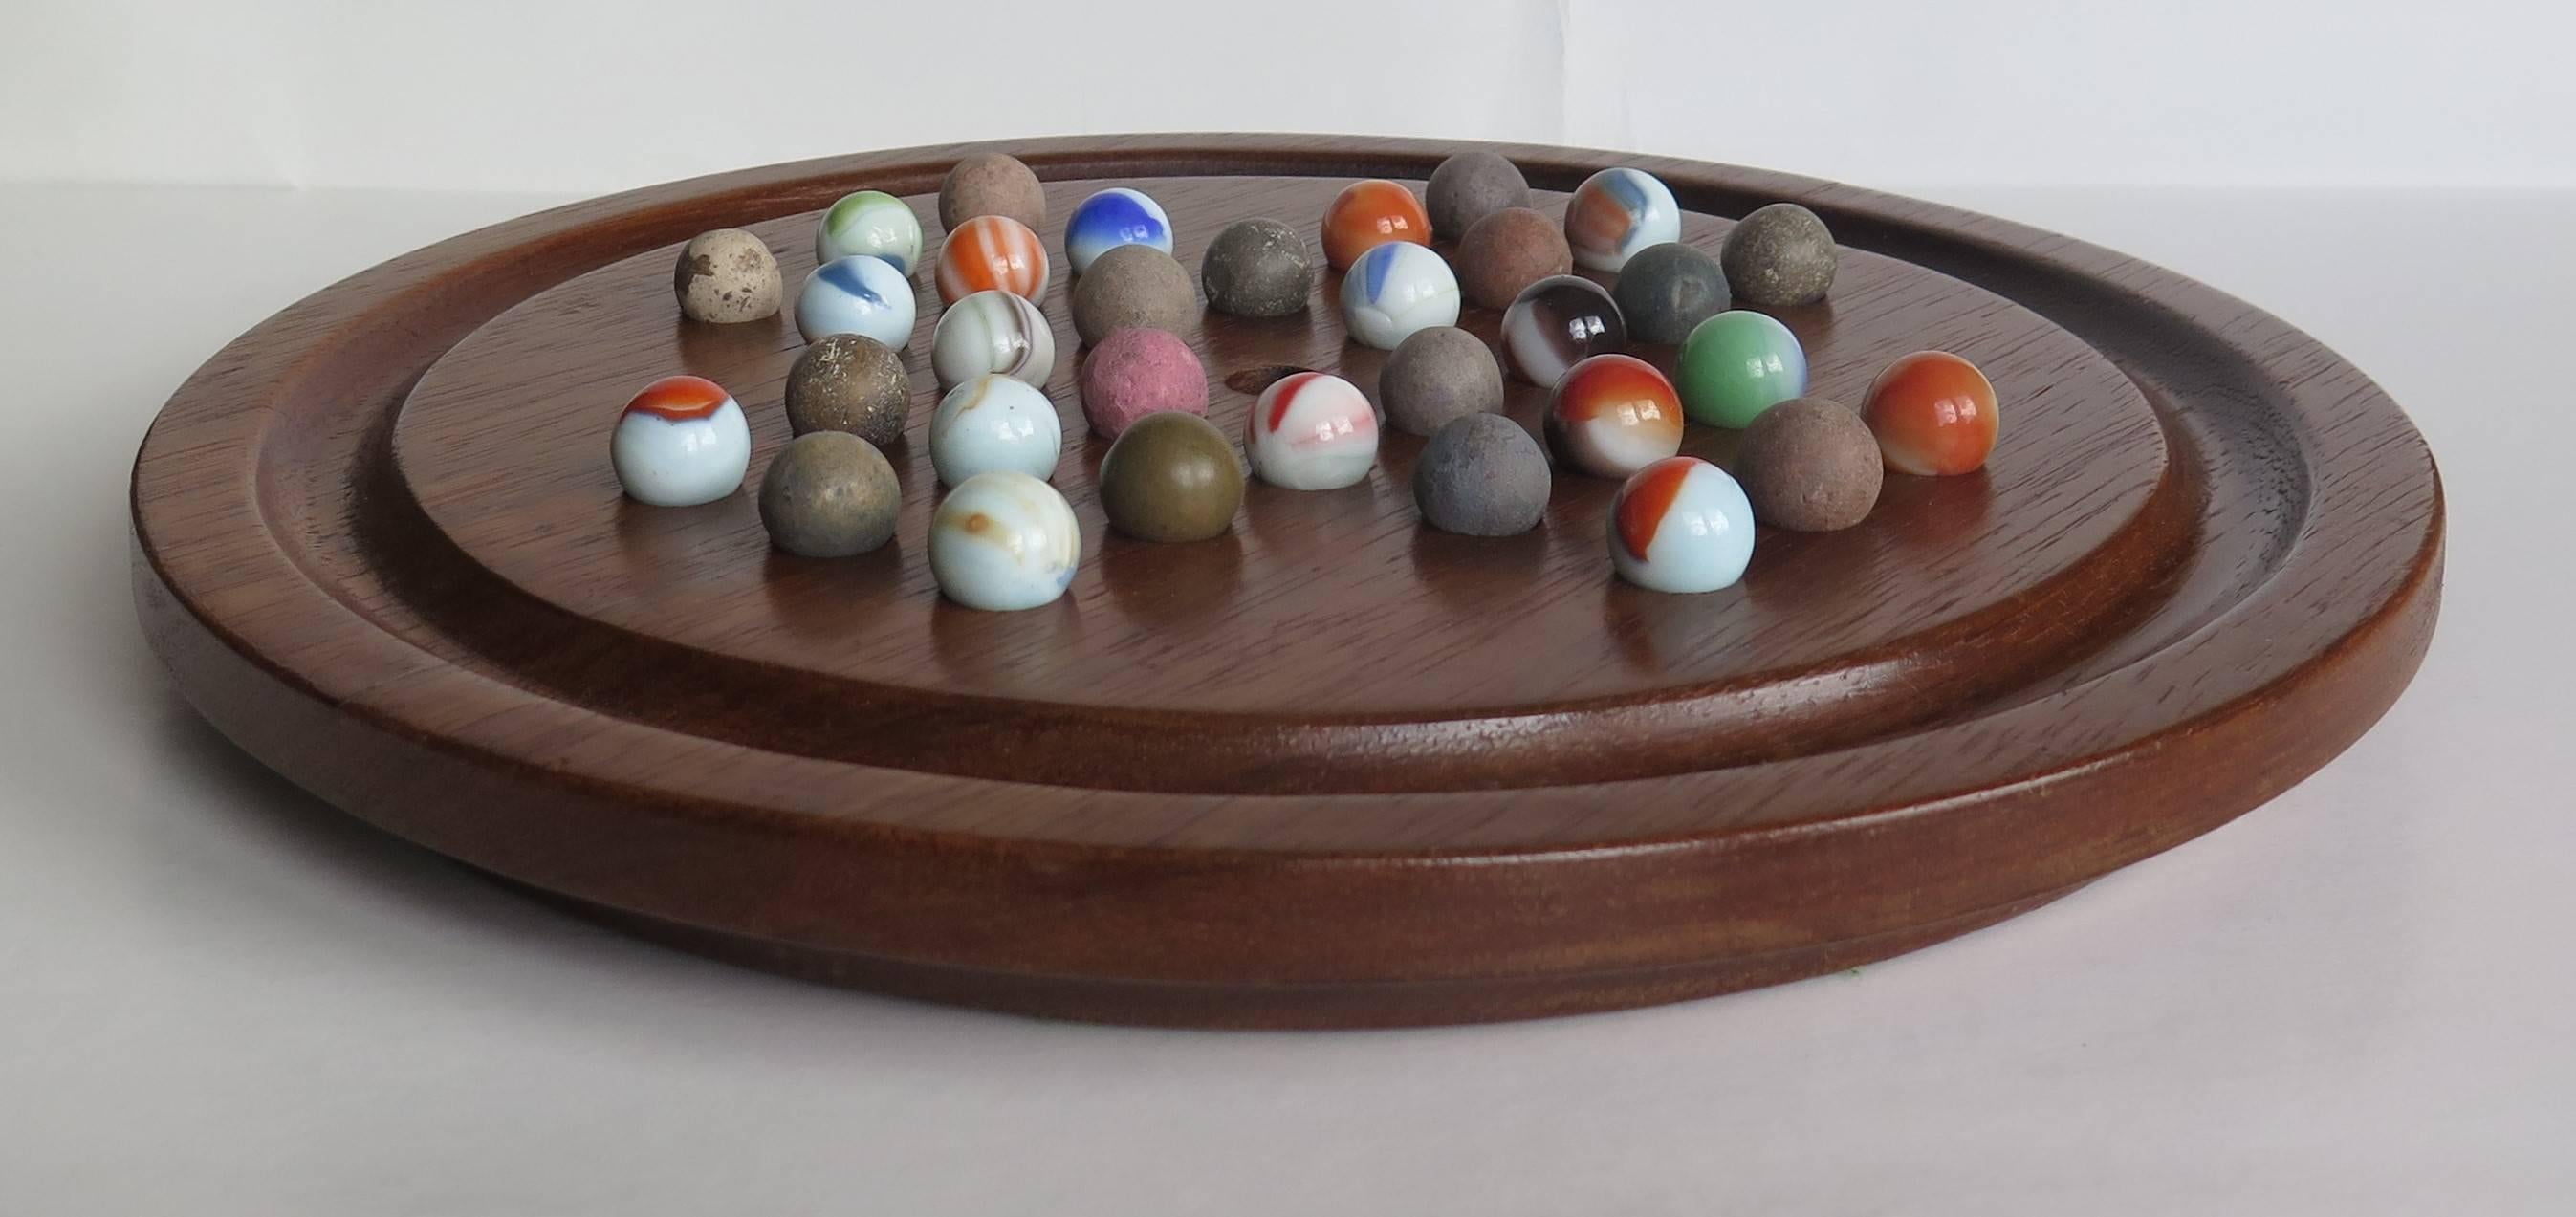 English 19th Century Table Marble Solitaire Board Game, Early Handmade Marbles